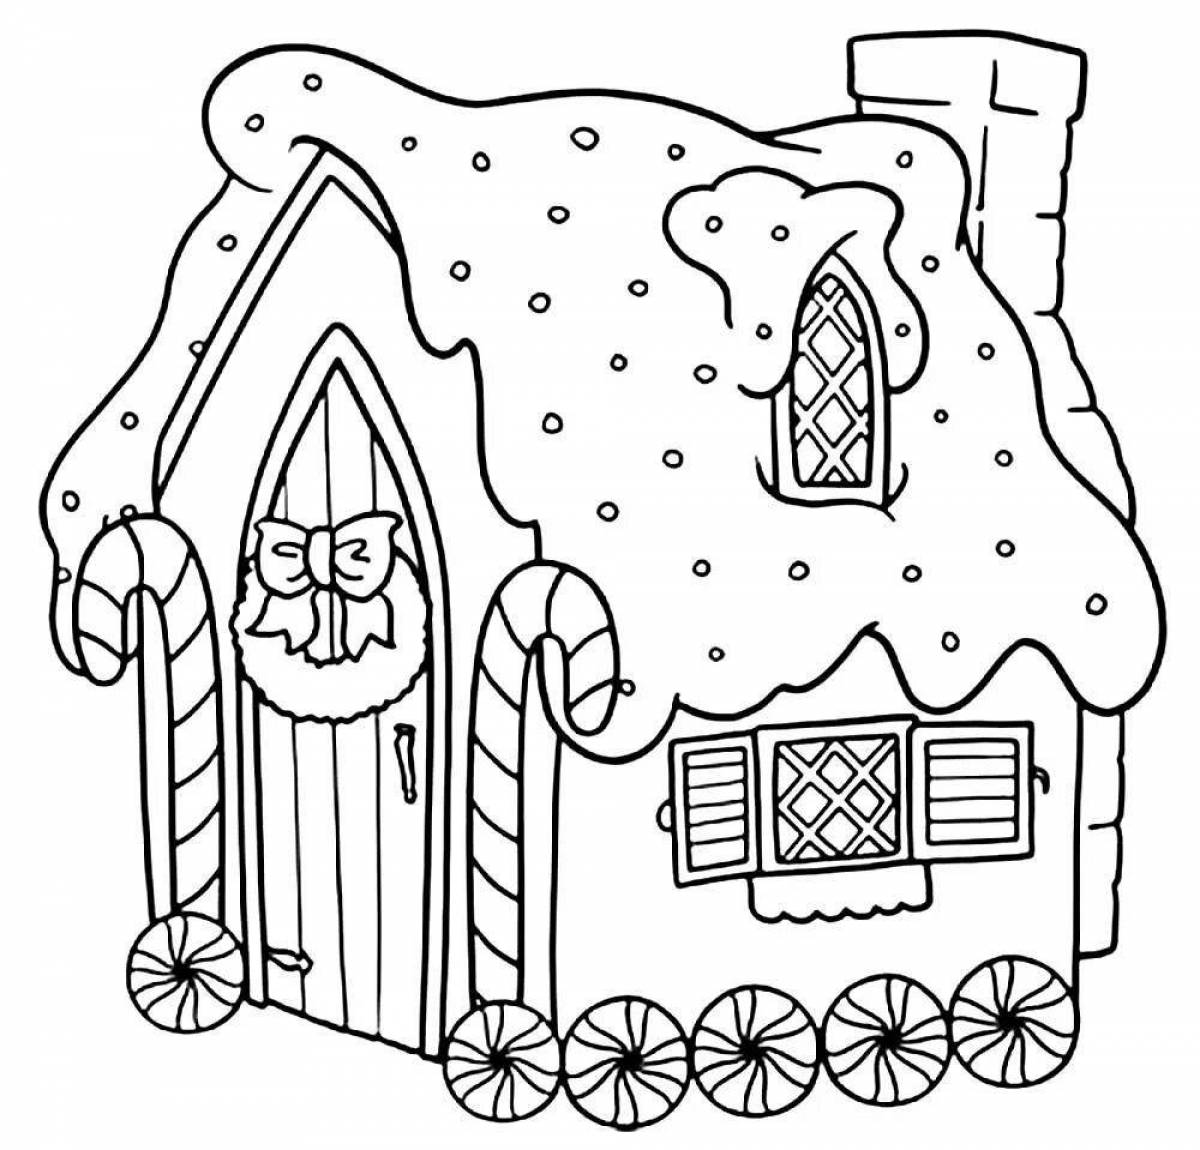 Fine ice hut coloring page